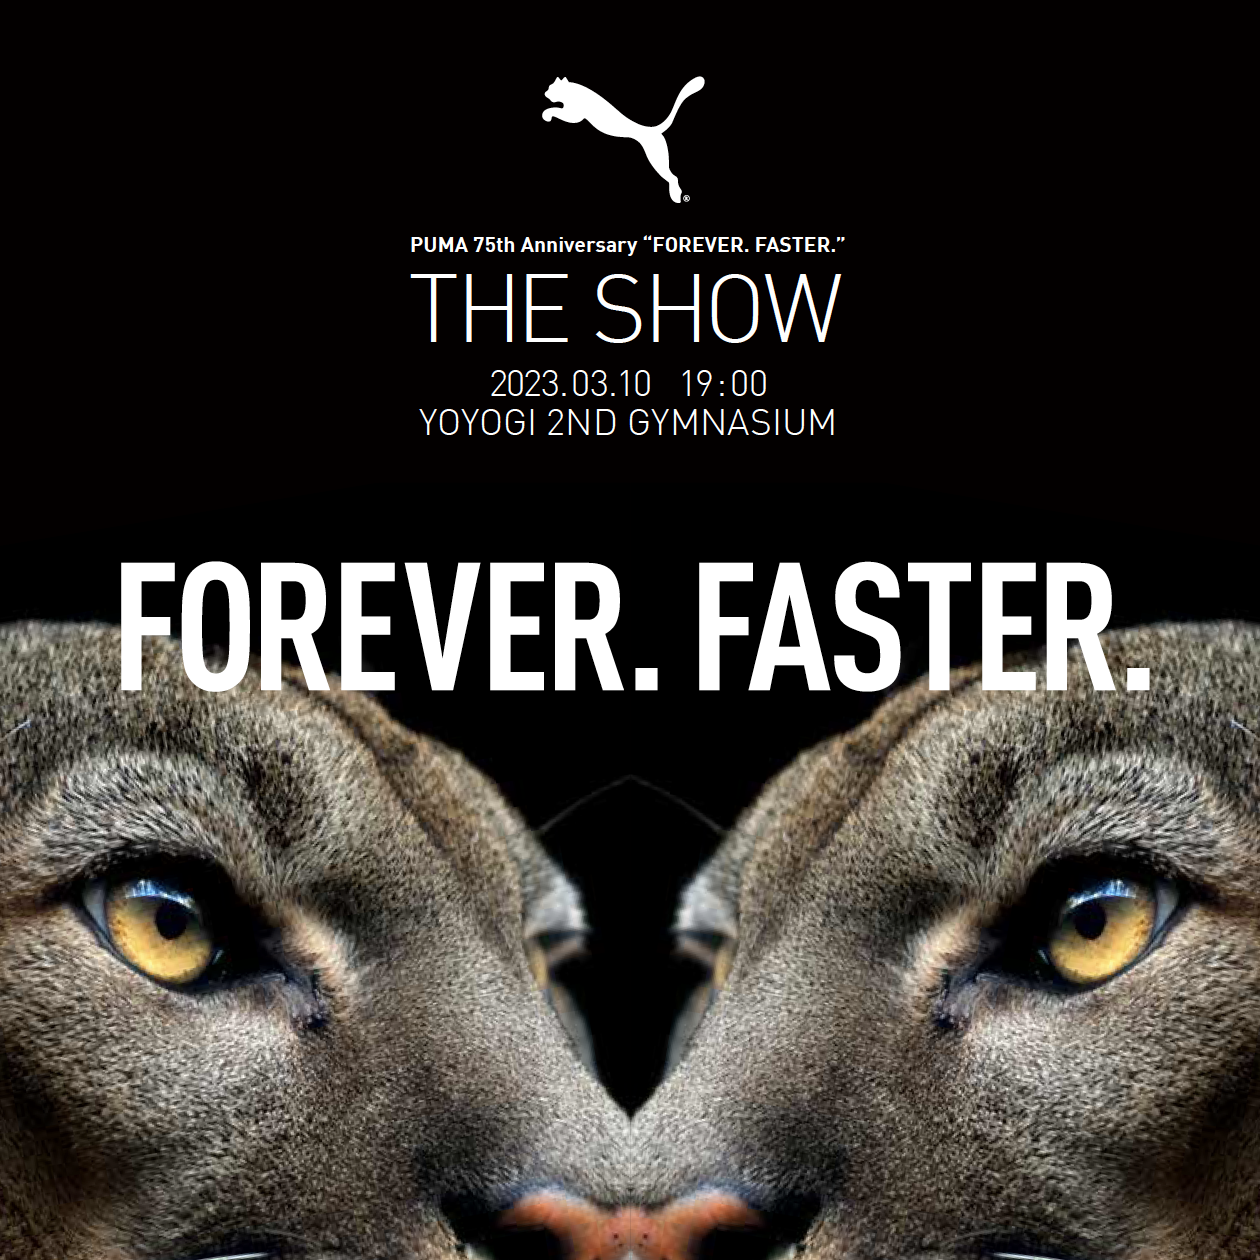 『PUMA 75th Anniversary “FOREVER. FASTER.” THE SHOW』開催。ライブ配信決定！